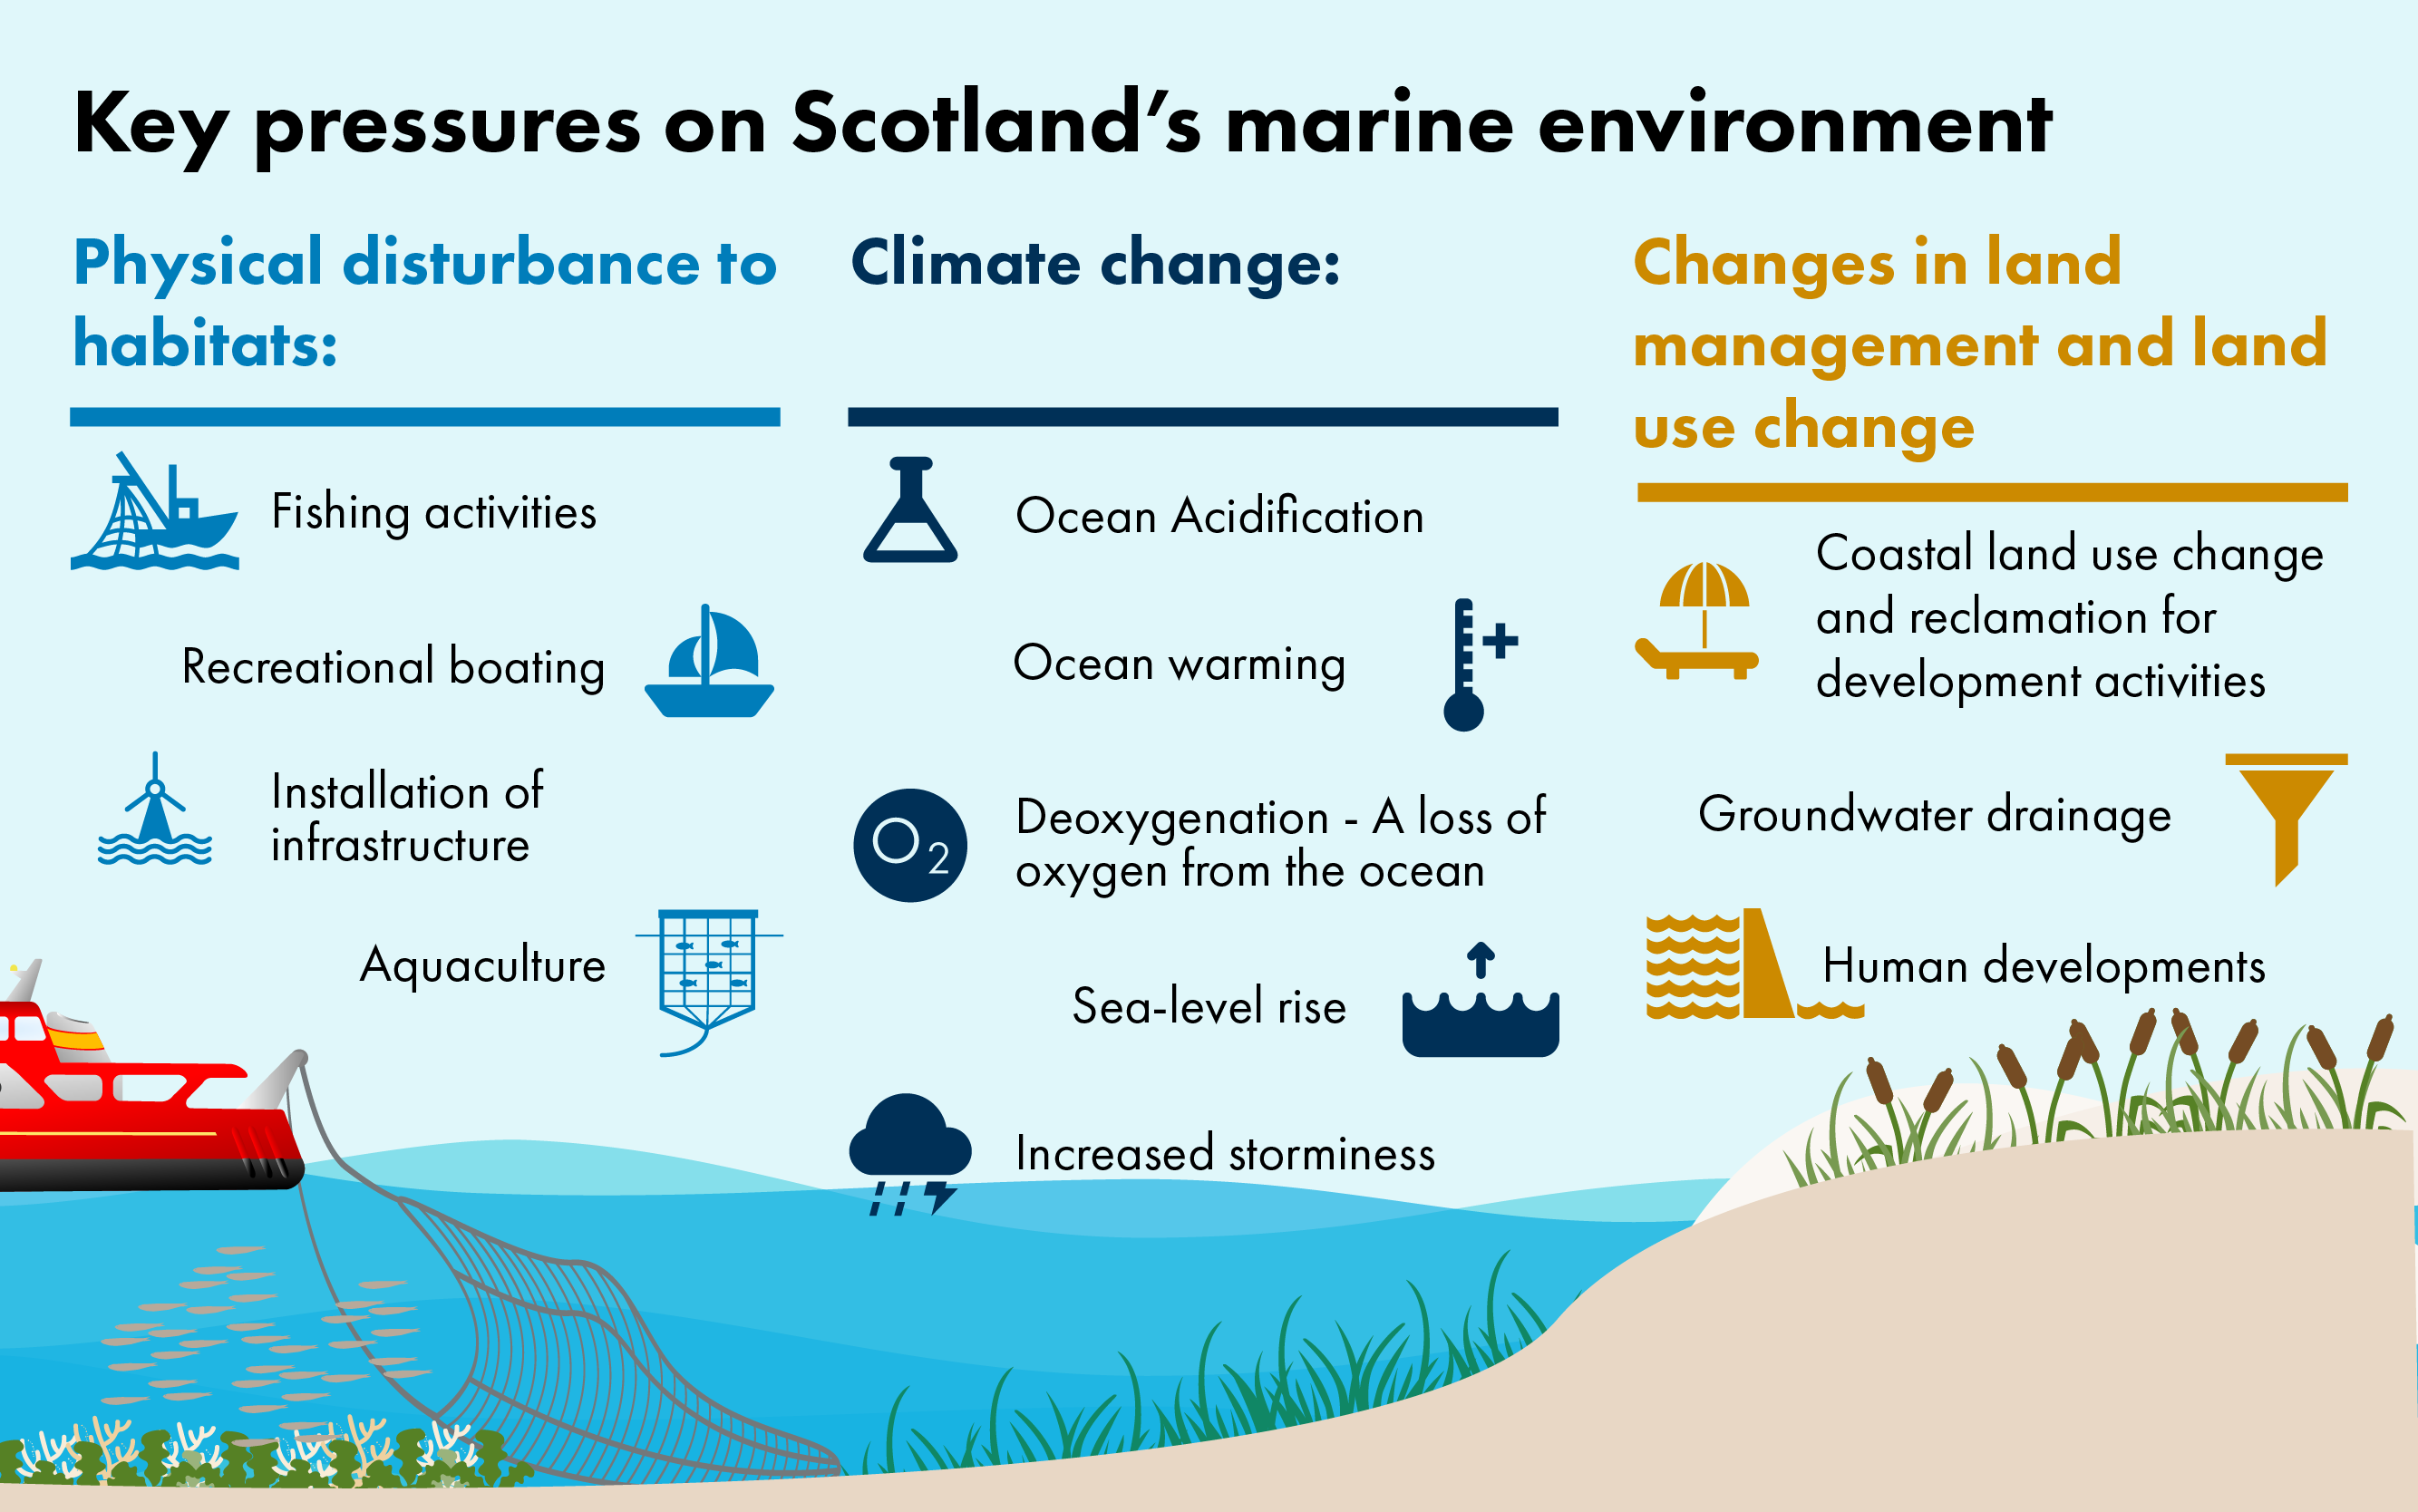 There are a range of pressures on the marine environment relates to physical disturbance to habitats, climate change and changes in land management and land use change. Examples include fishing activities, ocean warming and acidification, coastal land use change and human developments.